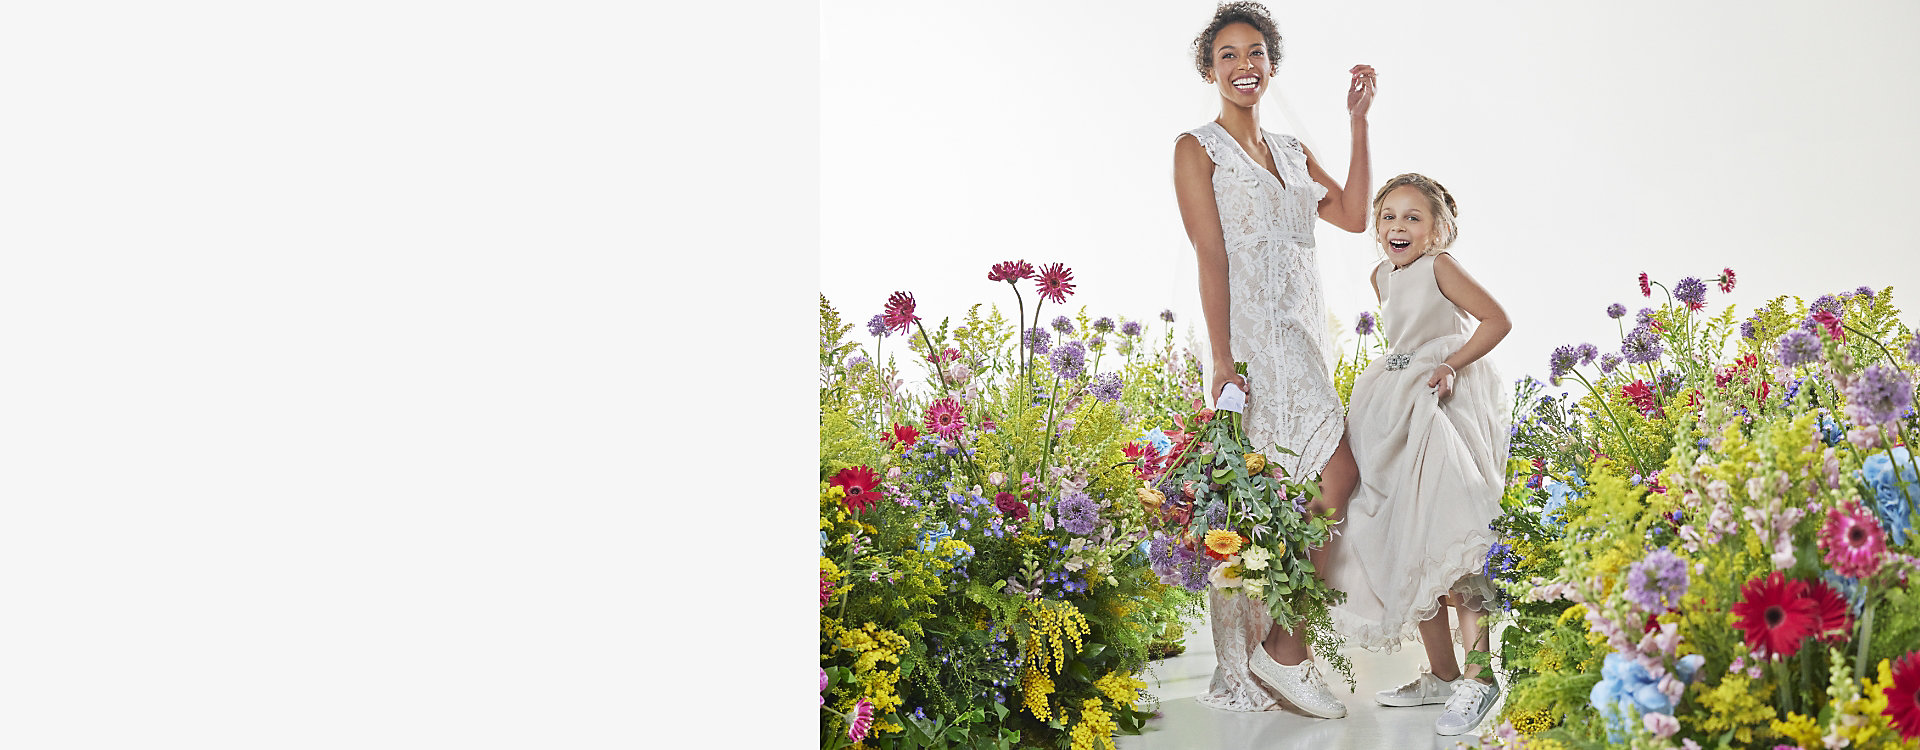 An adult and youth model surrounded by flowers, wearing formal dresses and shoes from the celebrations collection.